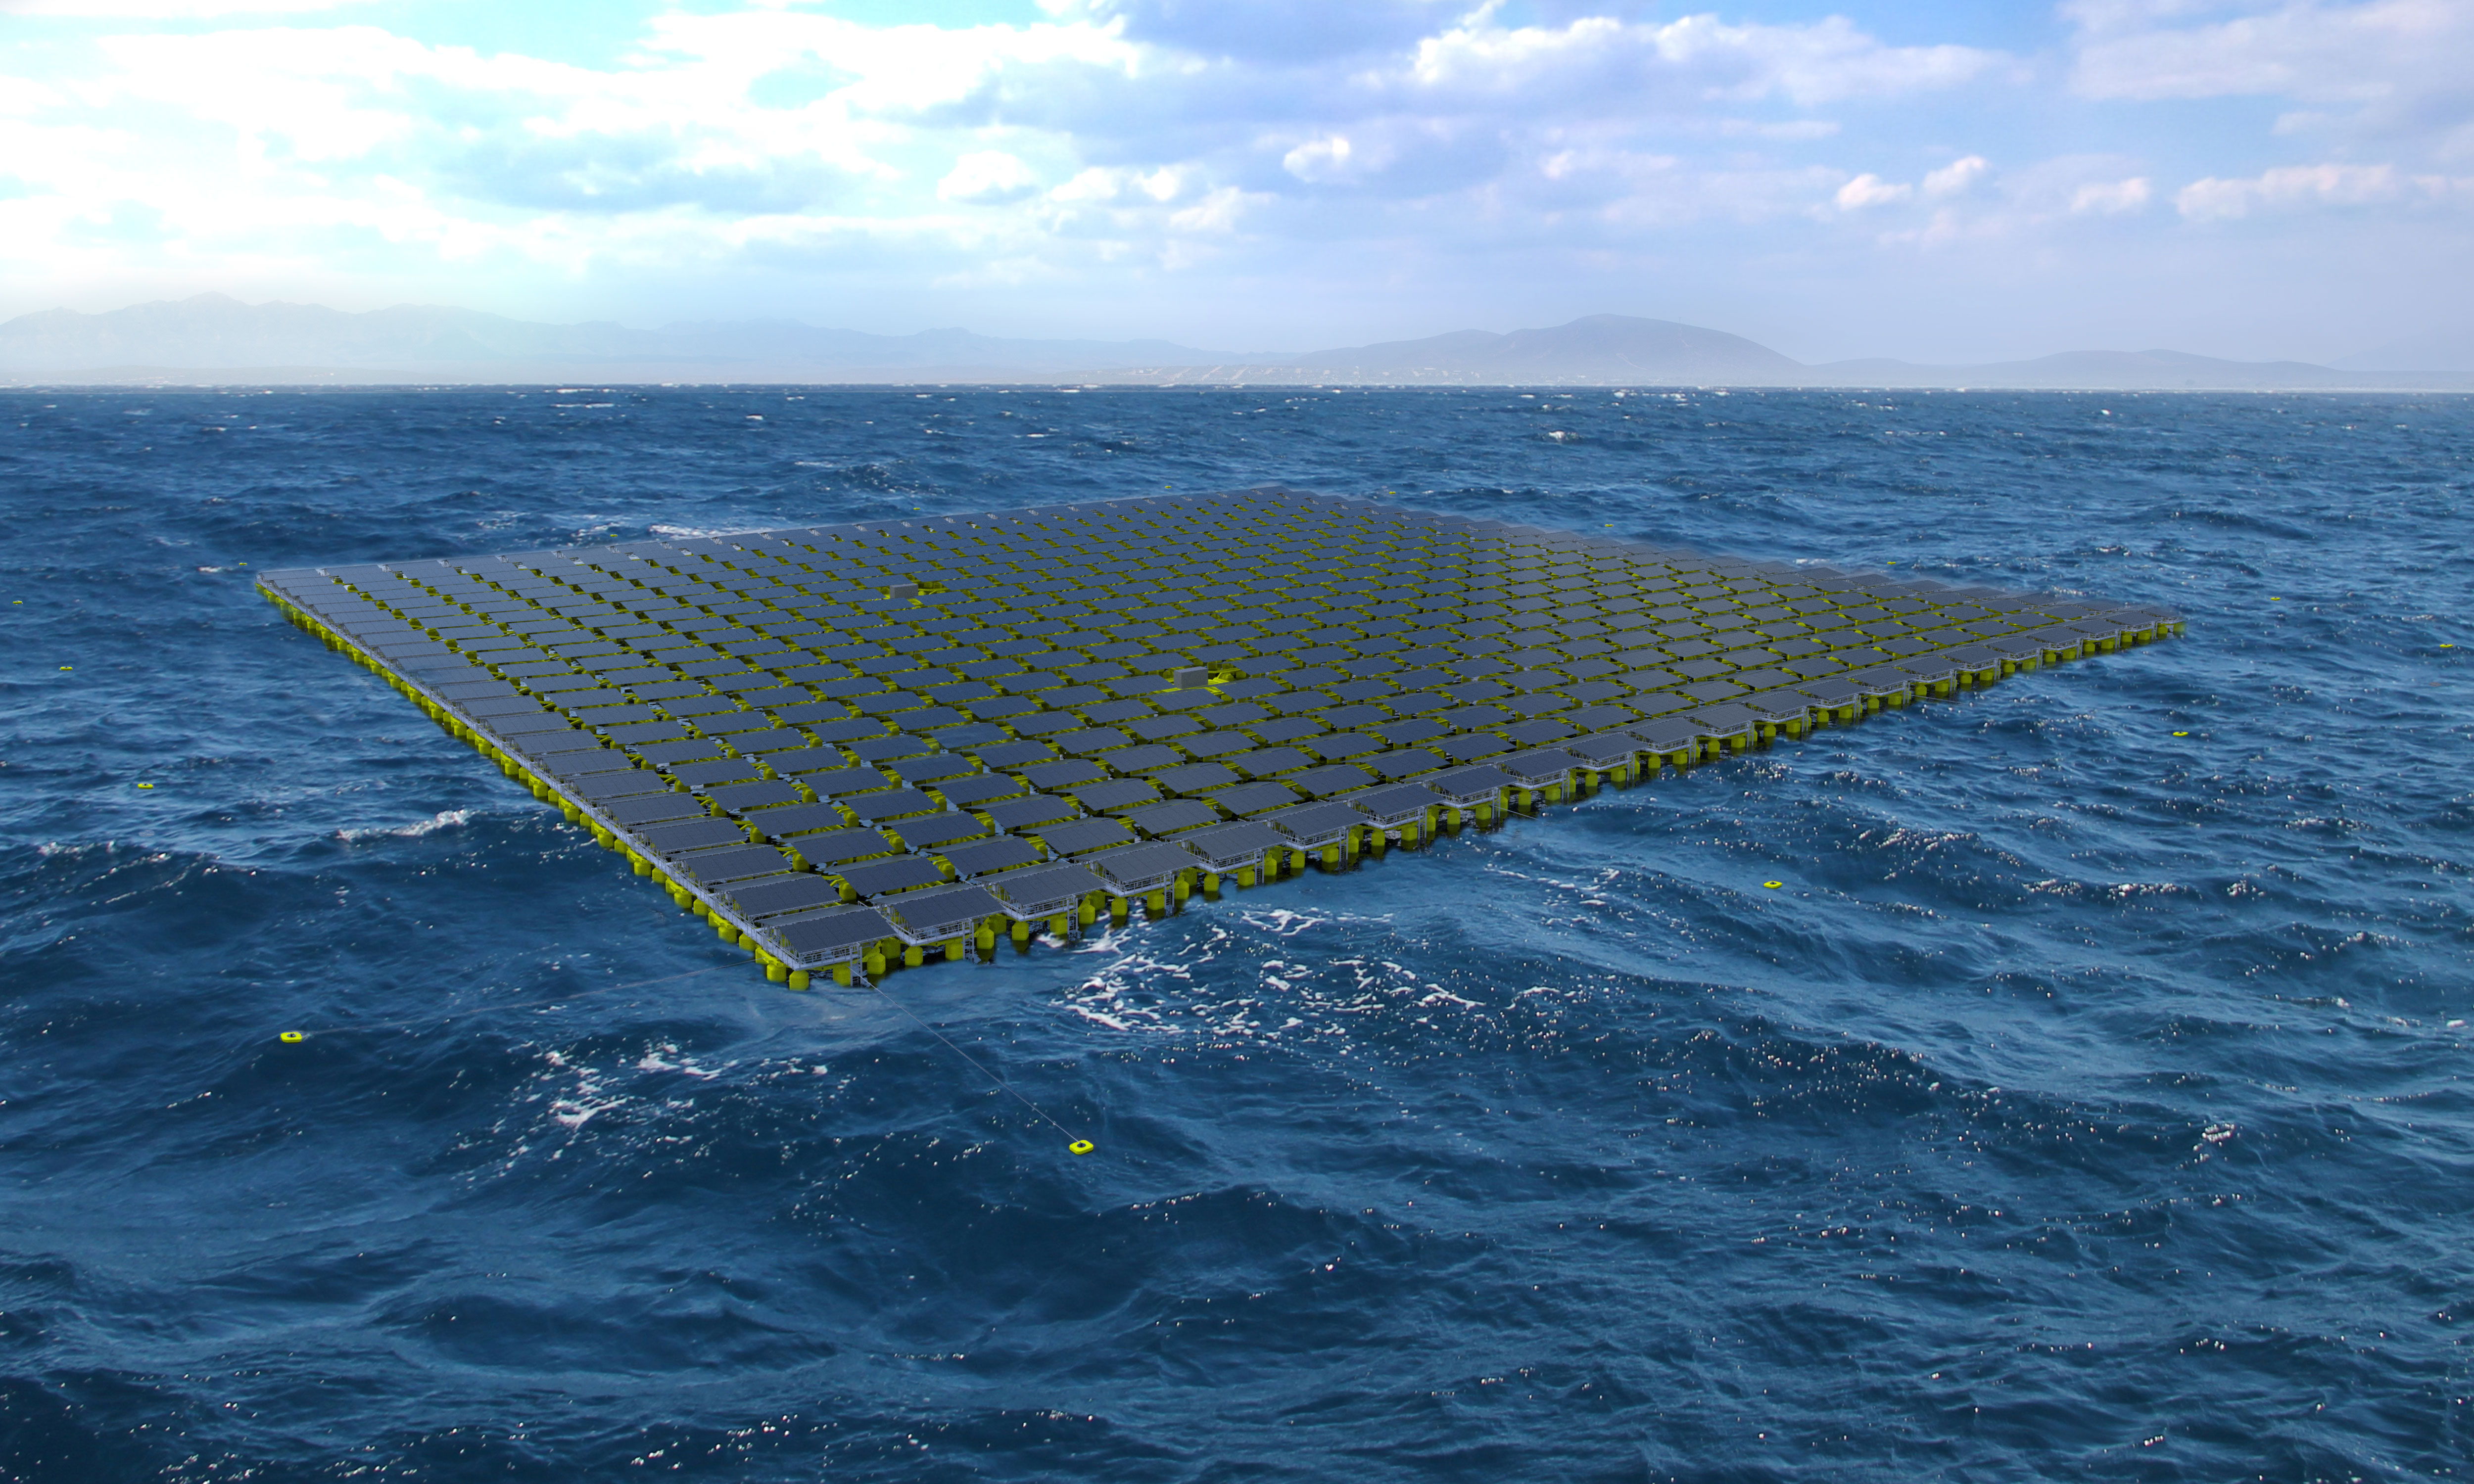 DNV has cooperated with offshore design and engineering services provider, Moss Maritime, to increase the deployment of floating solar technology in severe environmental conditions